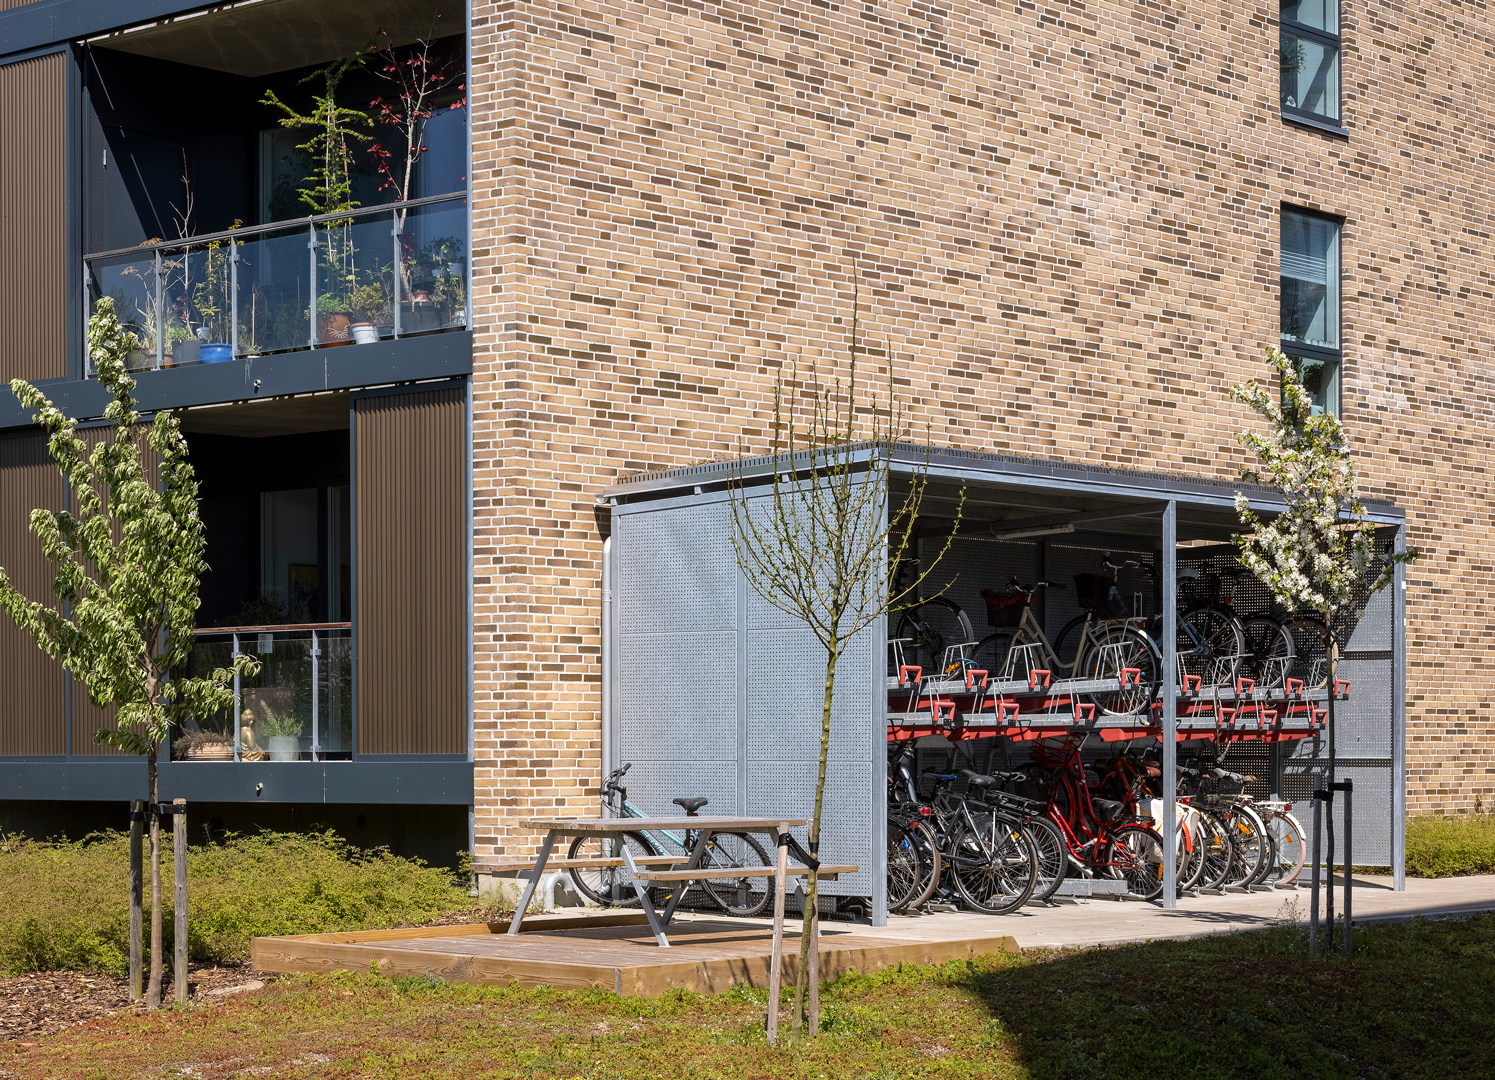 Dual level bike parking with two tiers EASYLIFT CAPACITY